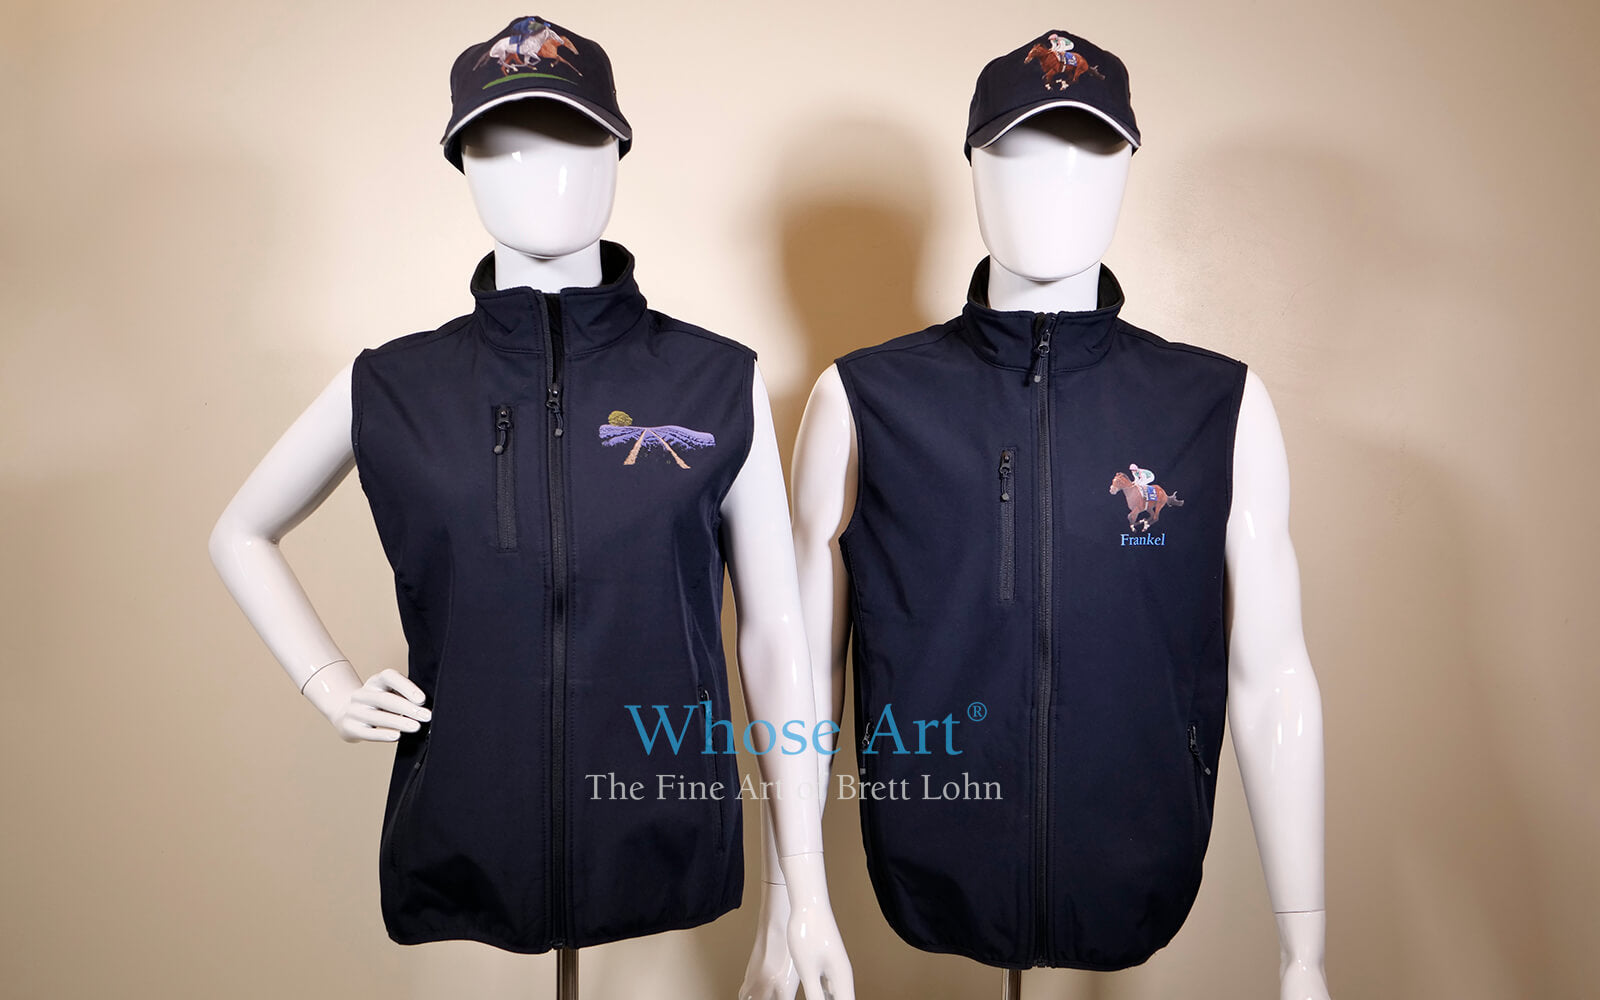 Gilet bodywarmers with Frankel horse printed on them as part of an equestrian clothing range